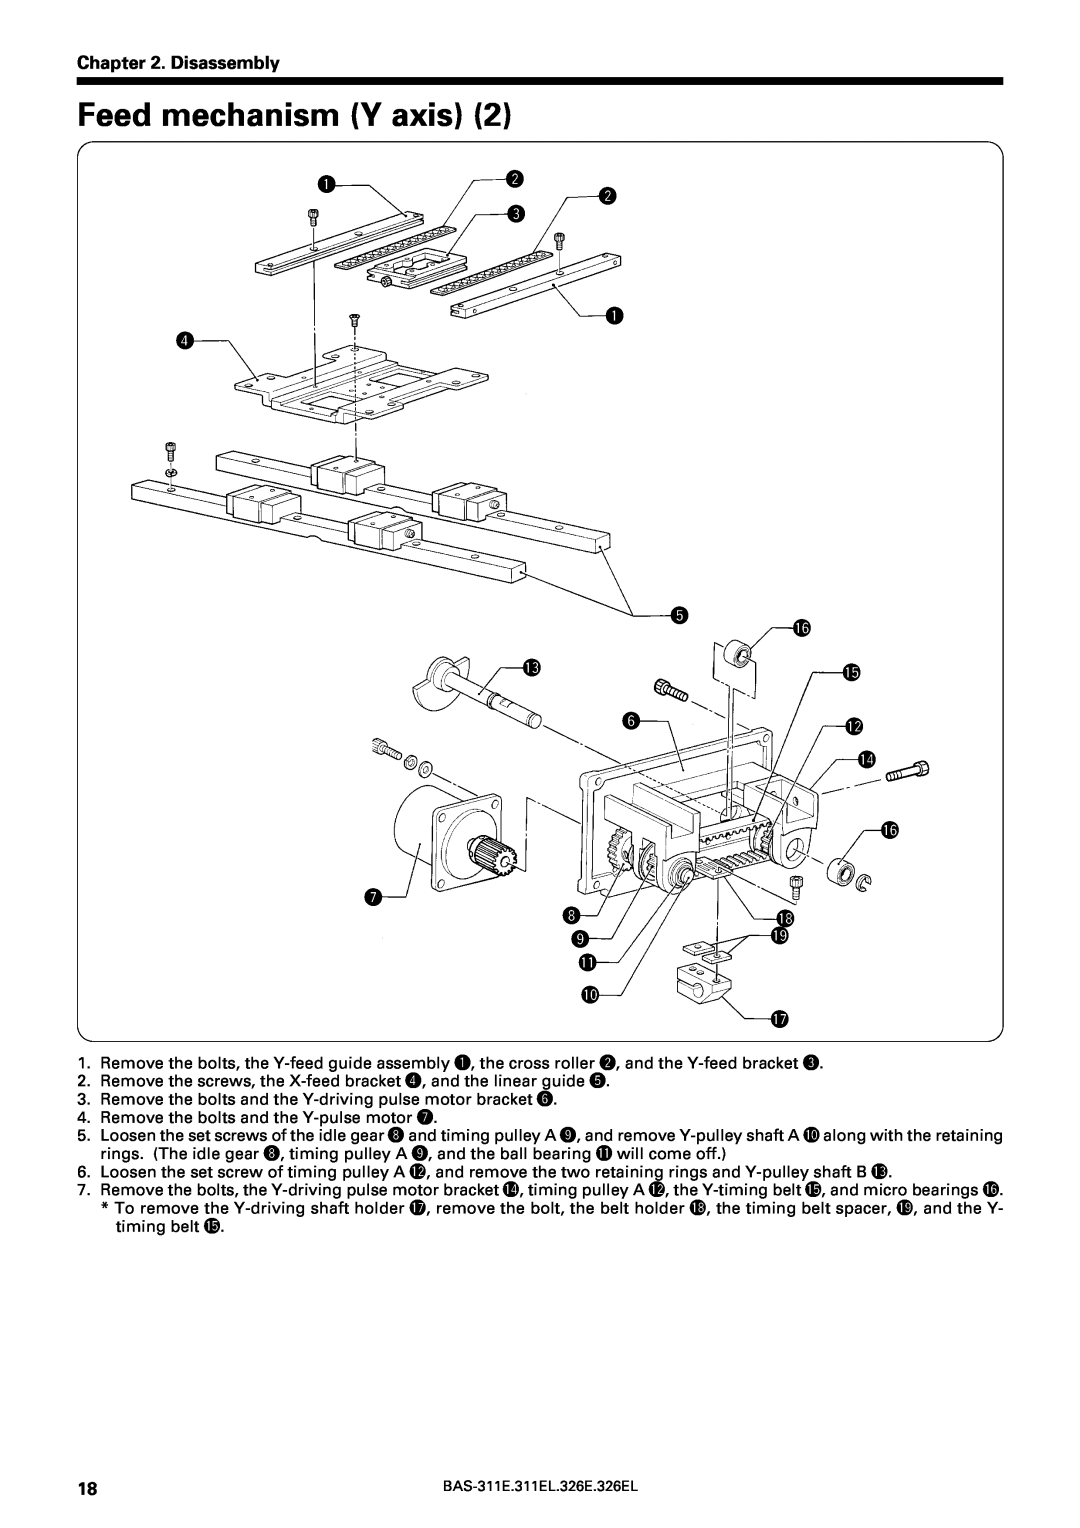 Brother BAS-311E service manual Feed mechanism Y axis, Disassembly, q r t 